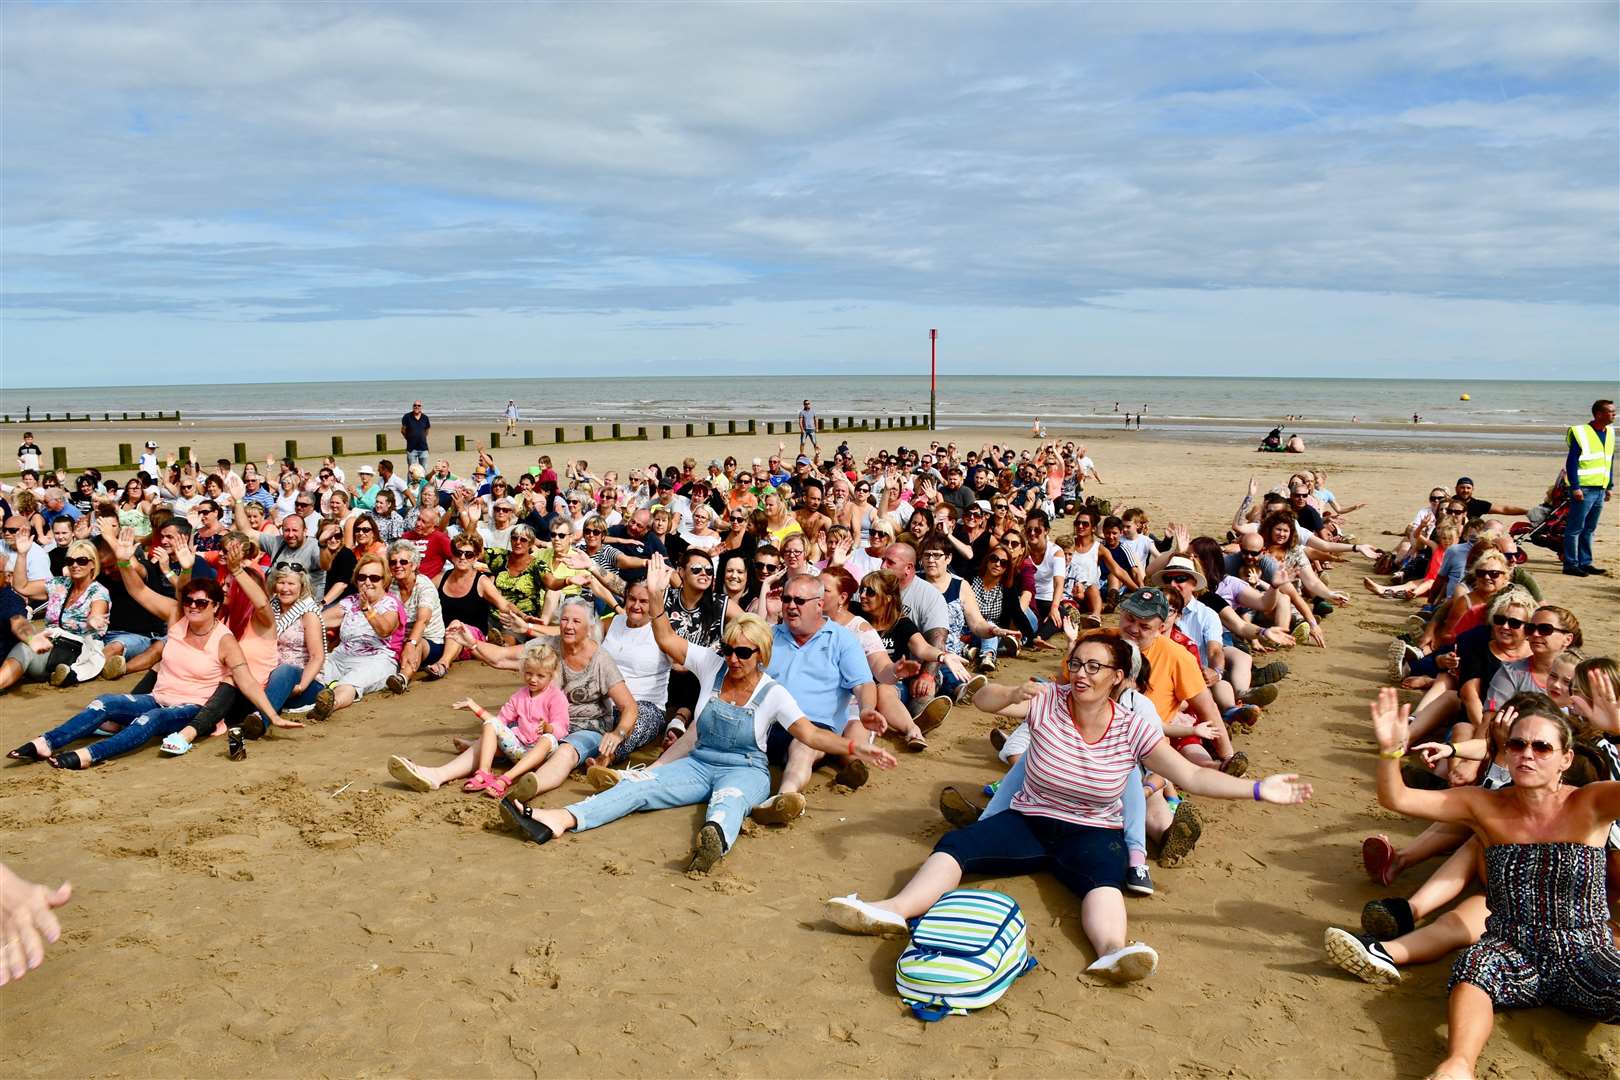 Oops Upside Your Head World Record attempt in Dymchurch. Credit: David Knight (3596198)